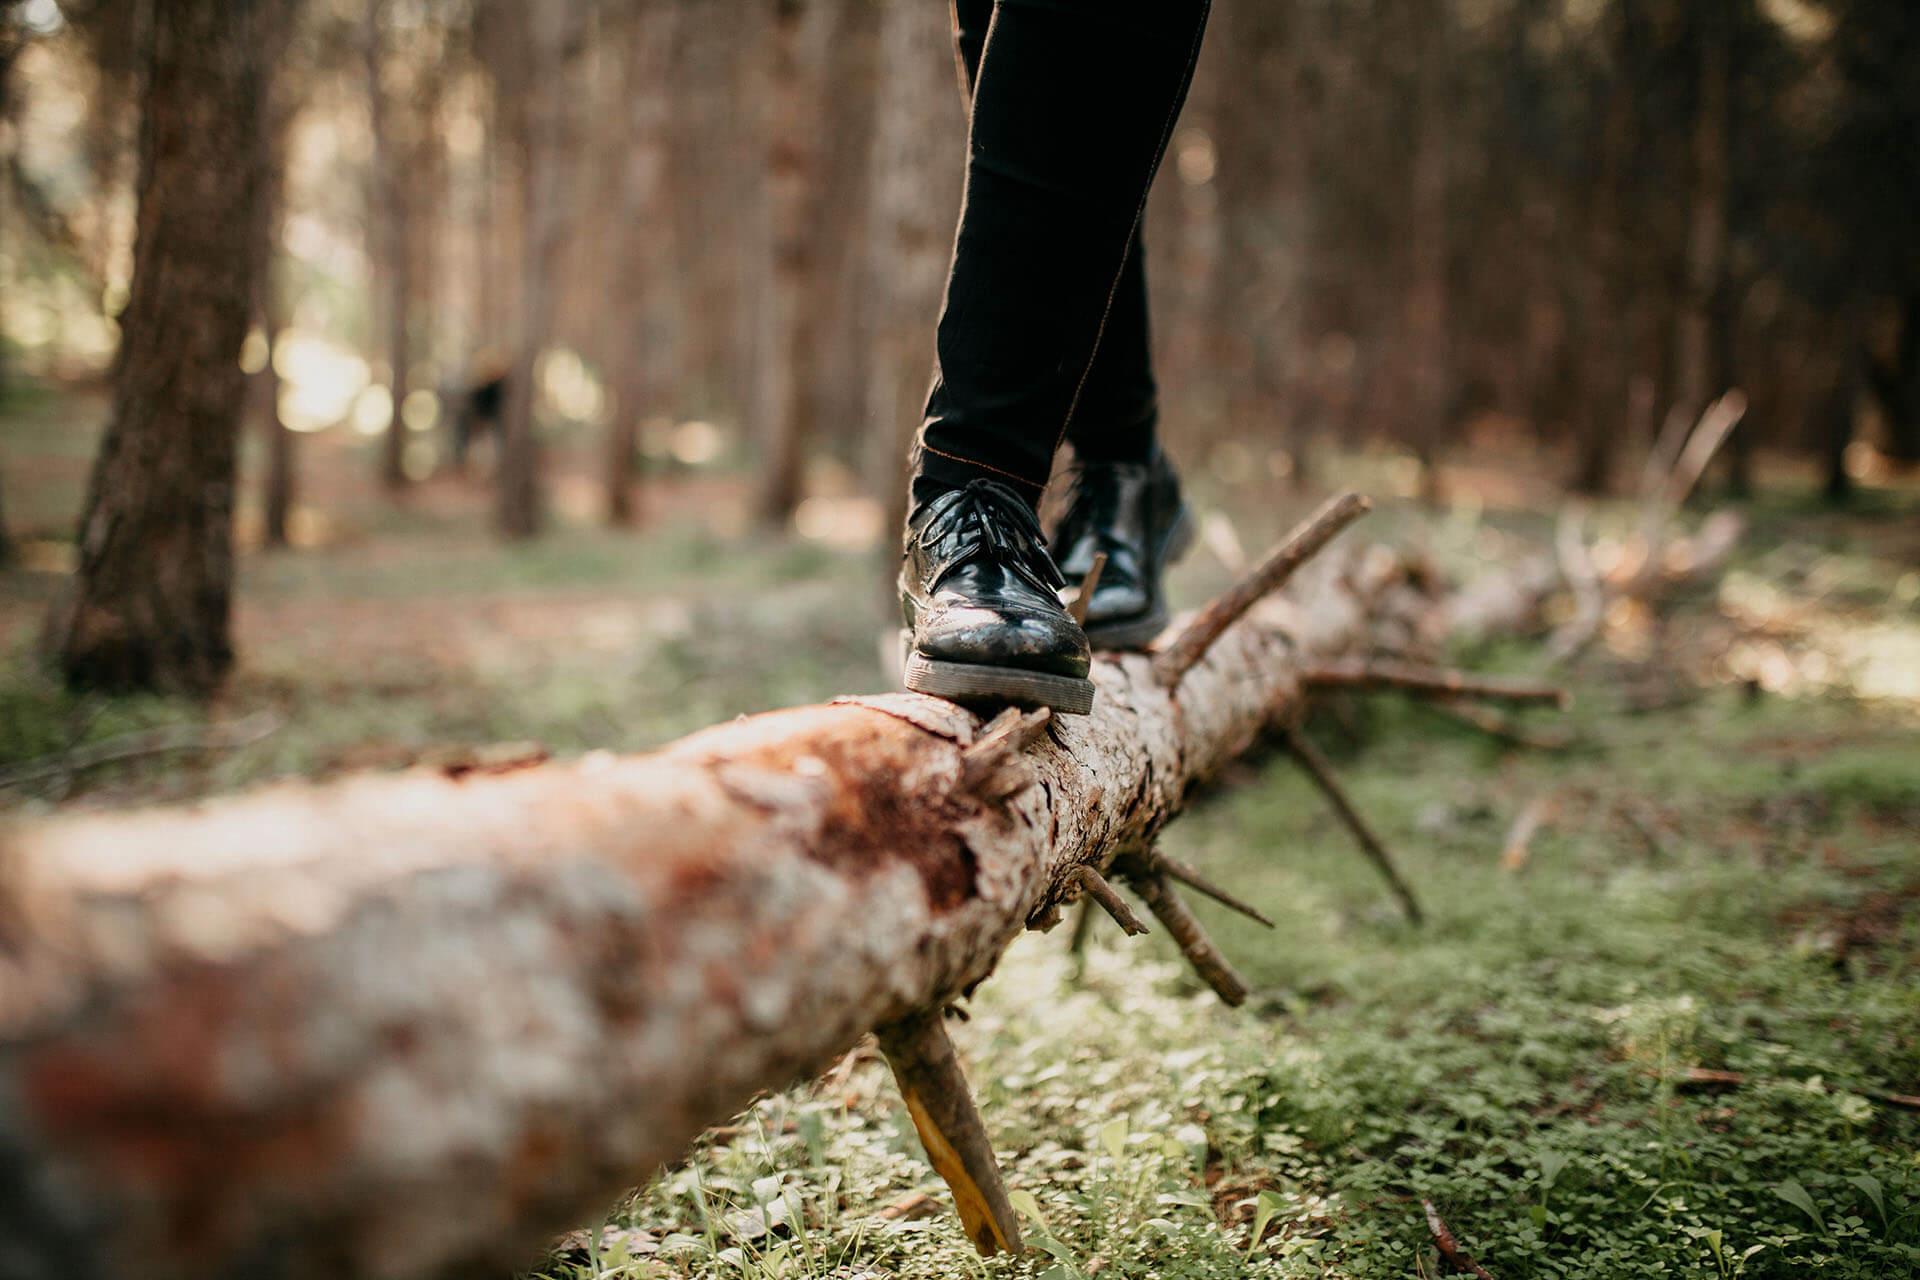 Close up of a person's leg's balancing on a forest log.